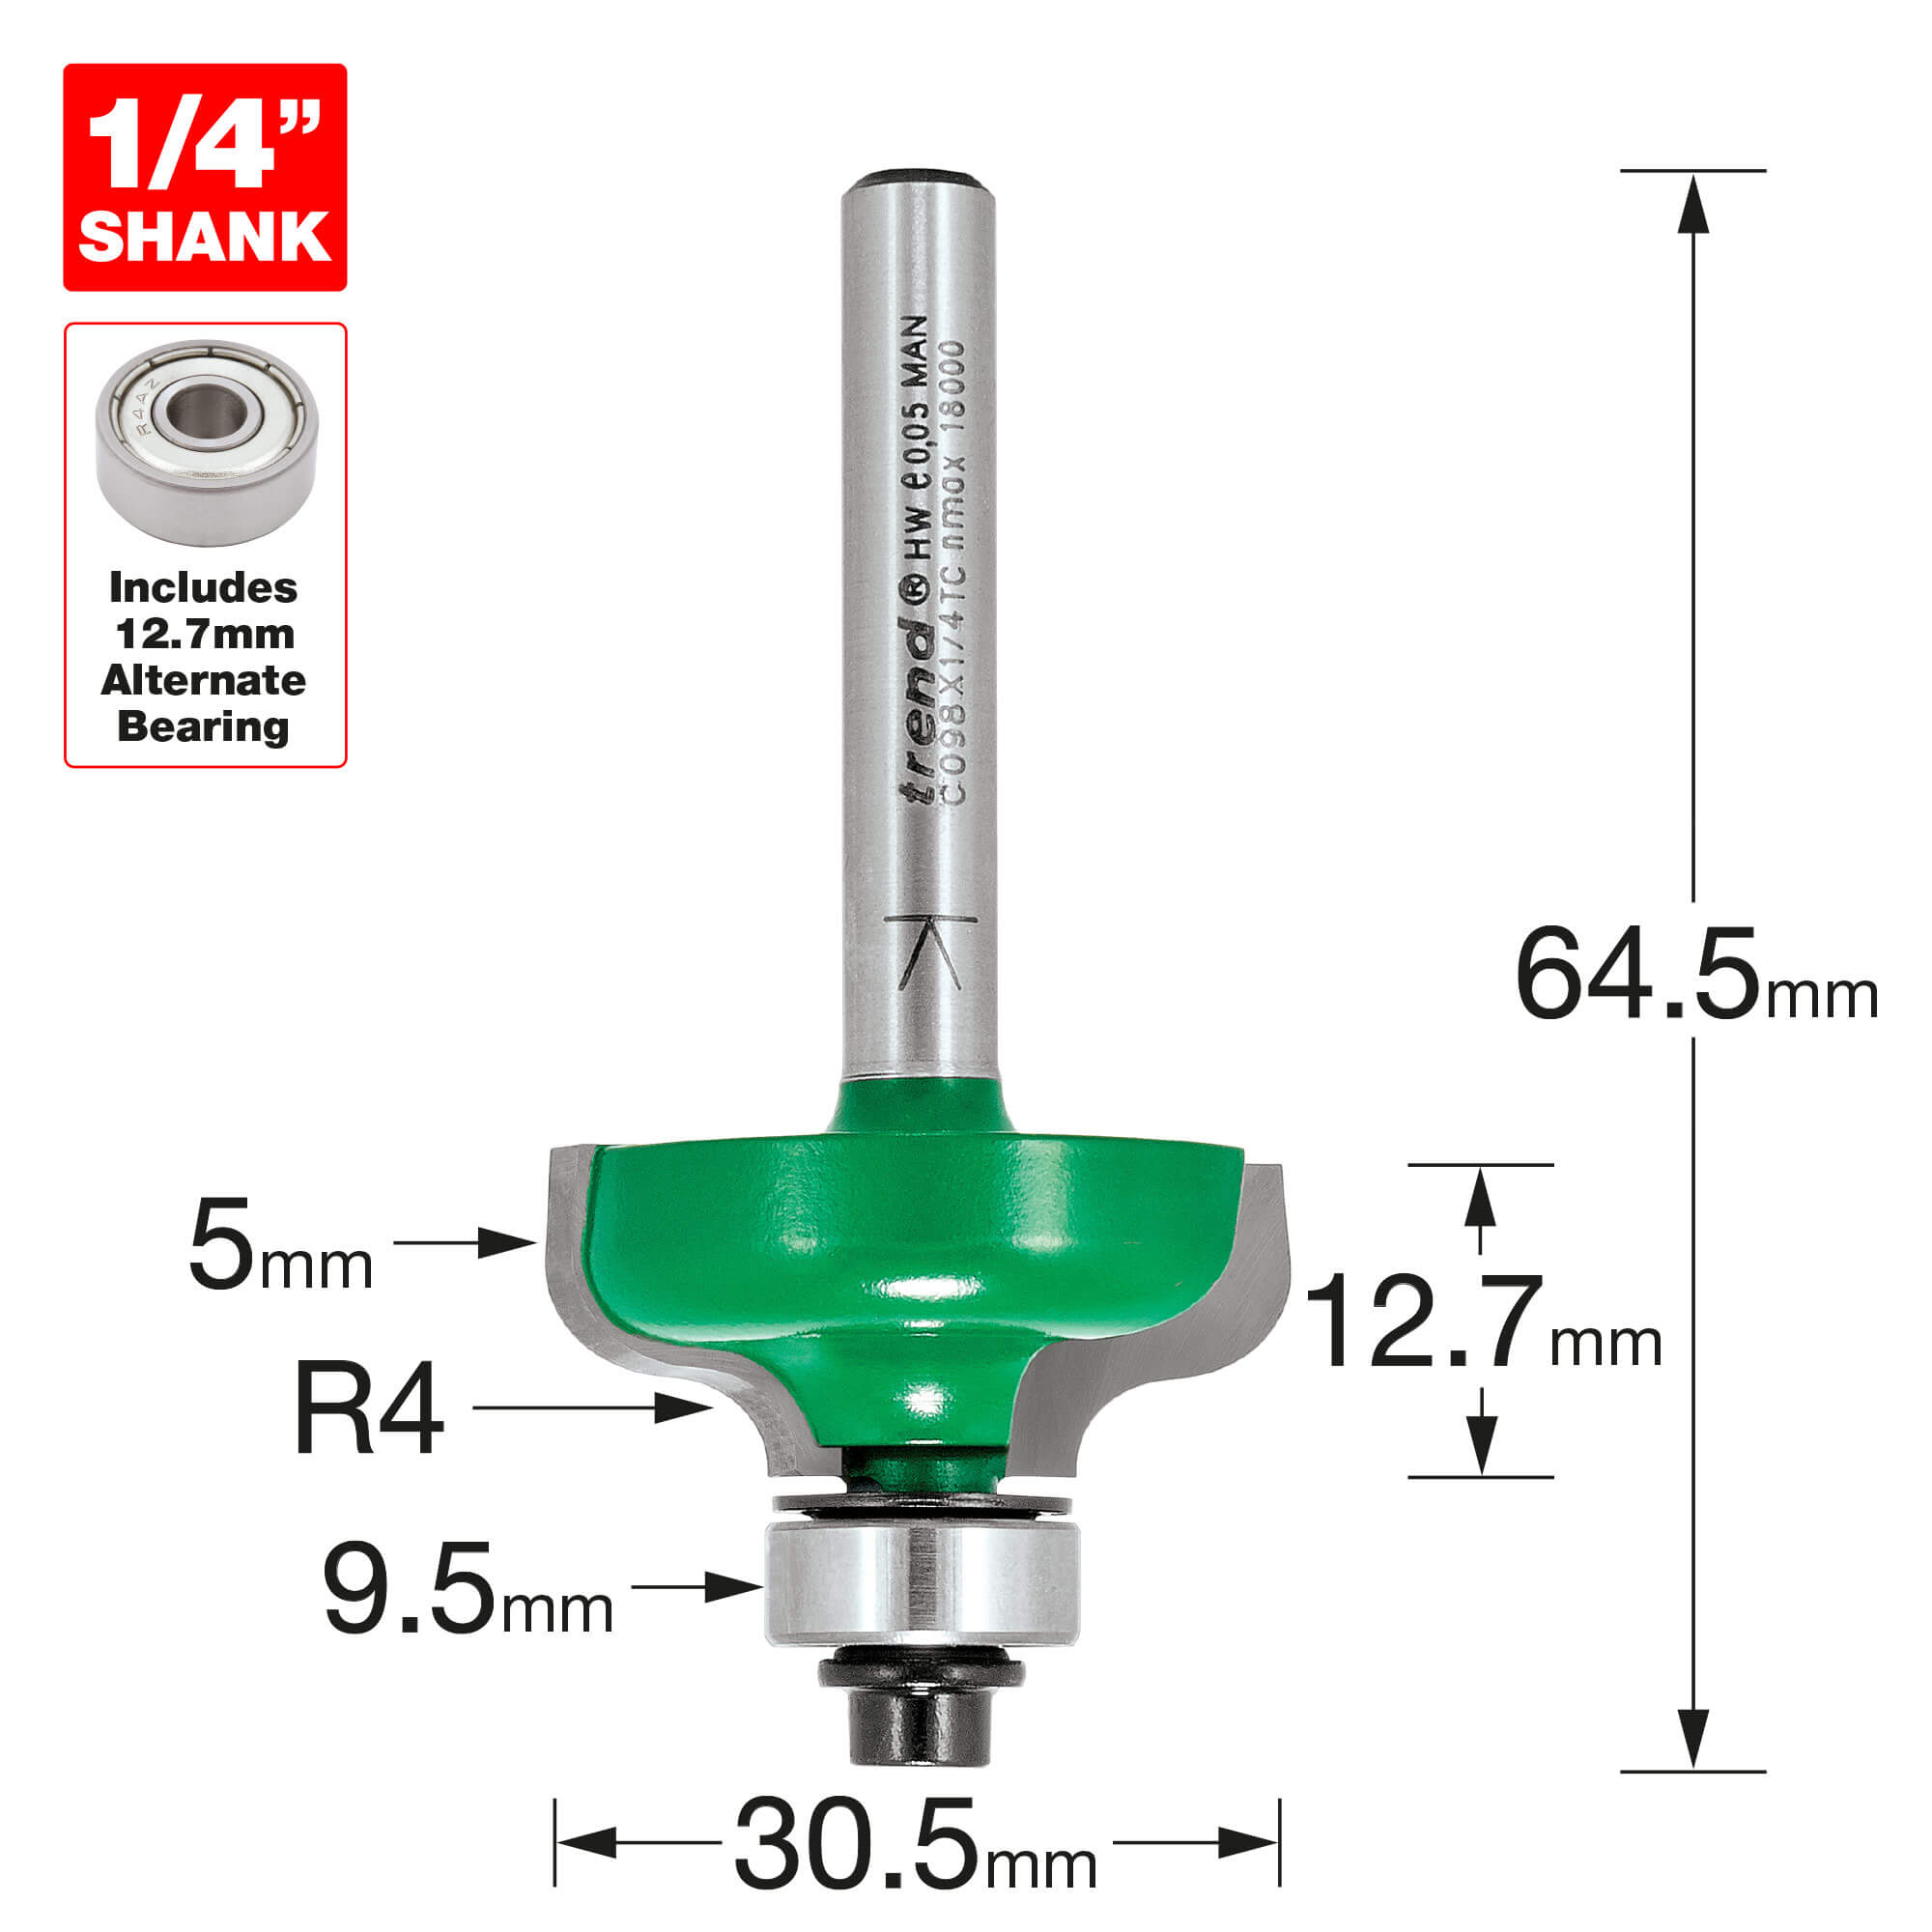 Image of Trend CRAFTPRO Ogee Mould Bearing Guided Router Cutter 12.7mm 9.5mm 1/4"